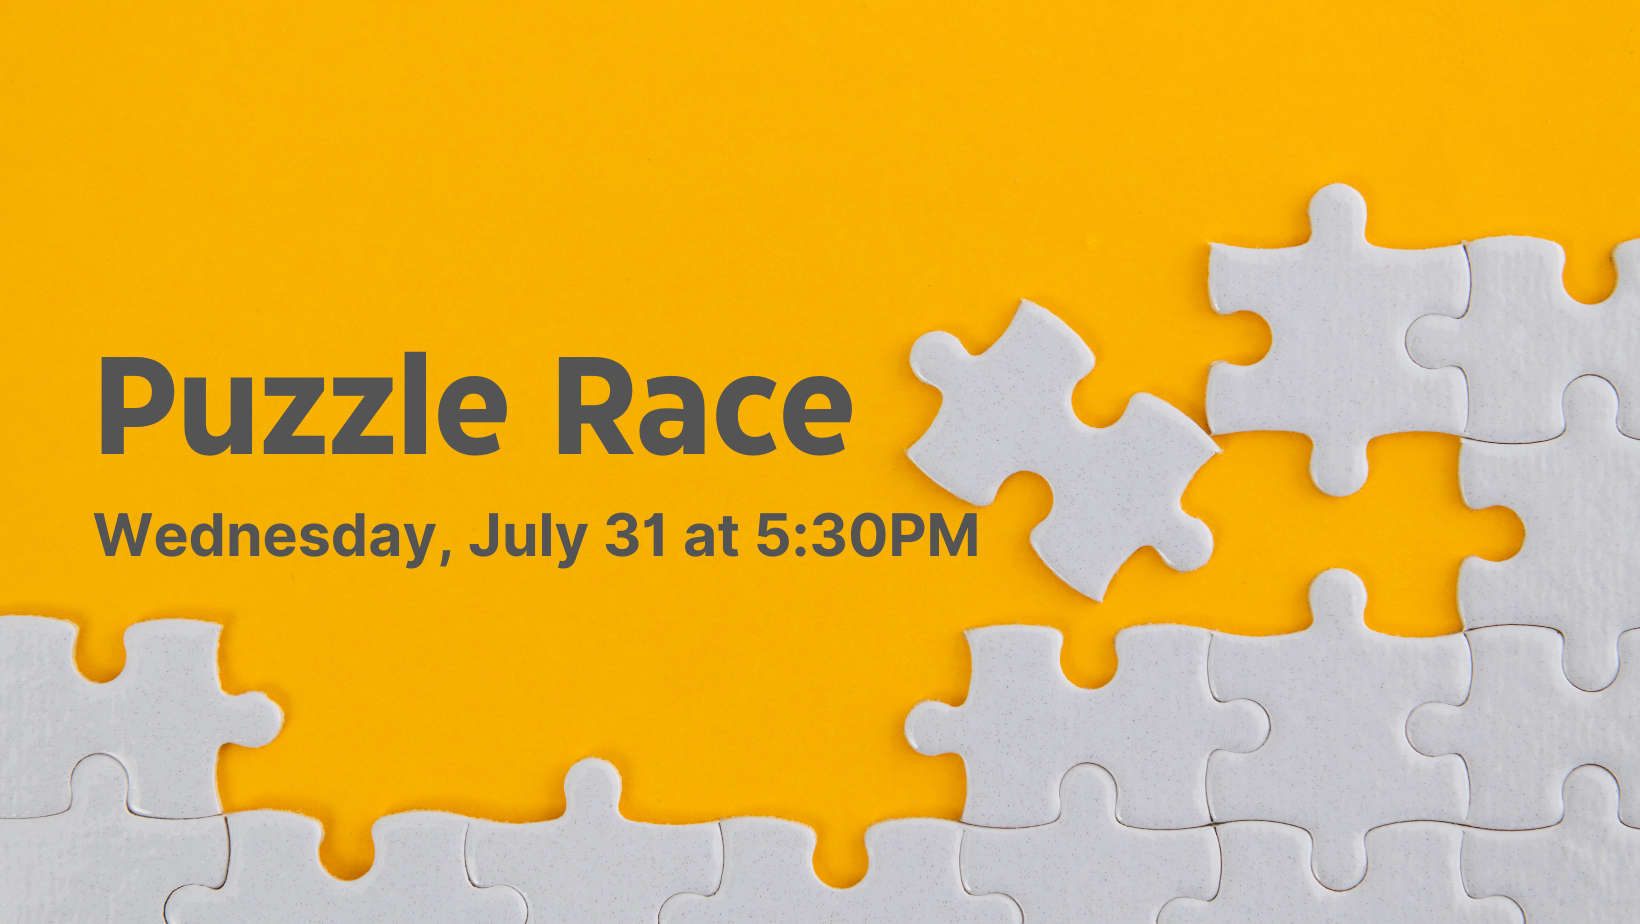 puzzle race on july 31 with white puzzle piece background